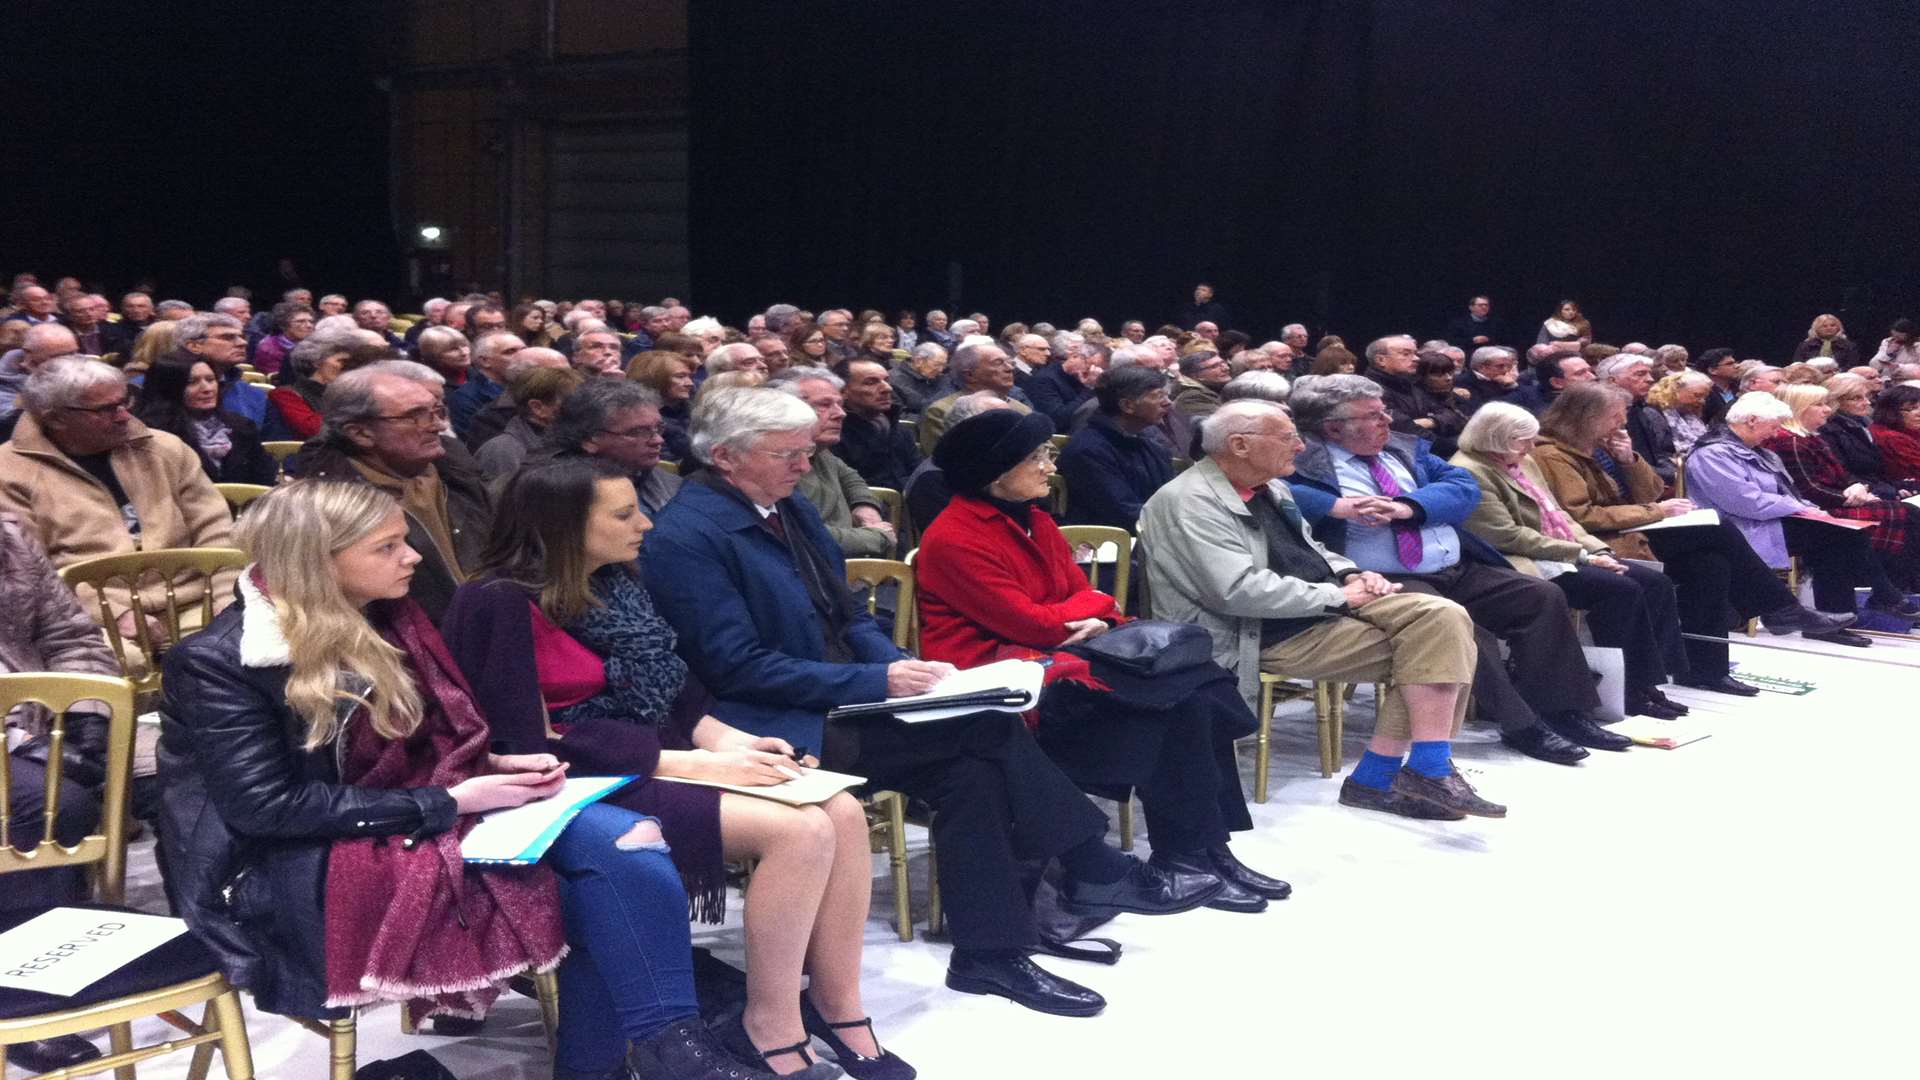 Around 350 people gathered for the debate at the Maidstone Studios